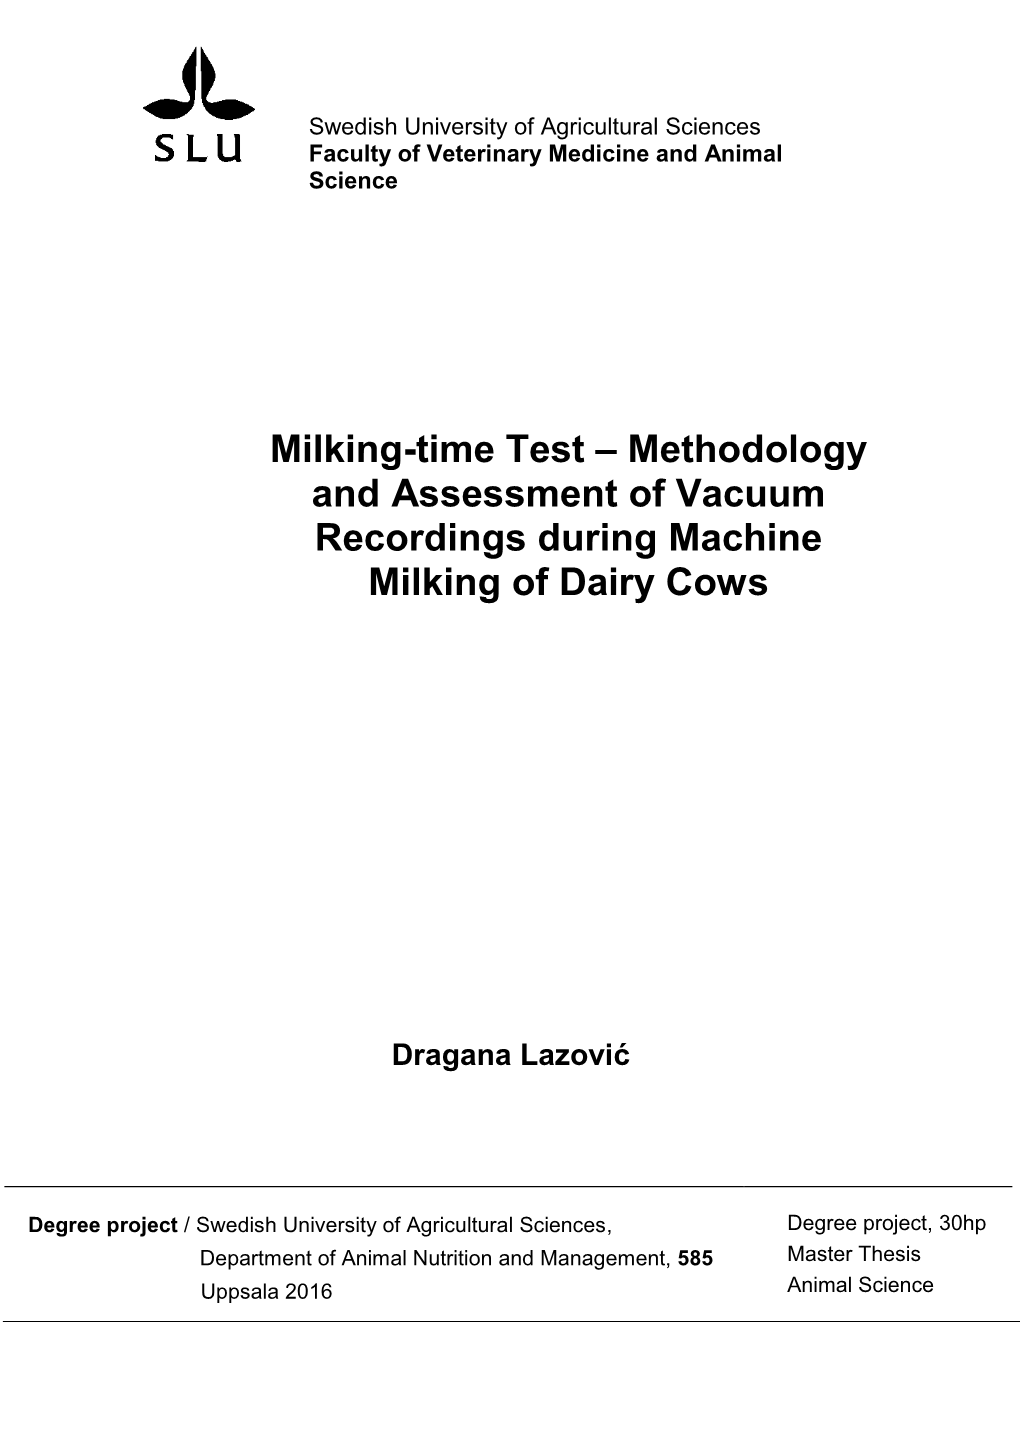 Milking-Time Test – Methodology and Assessment of Vacuum Recordings During Machine Milking of Dairy Cows